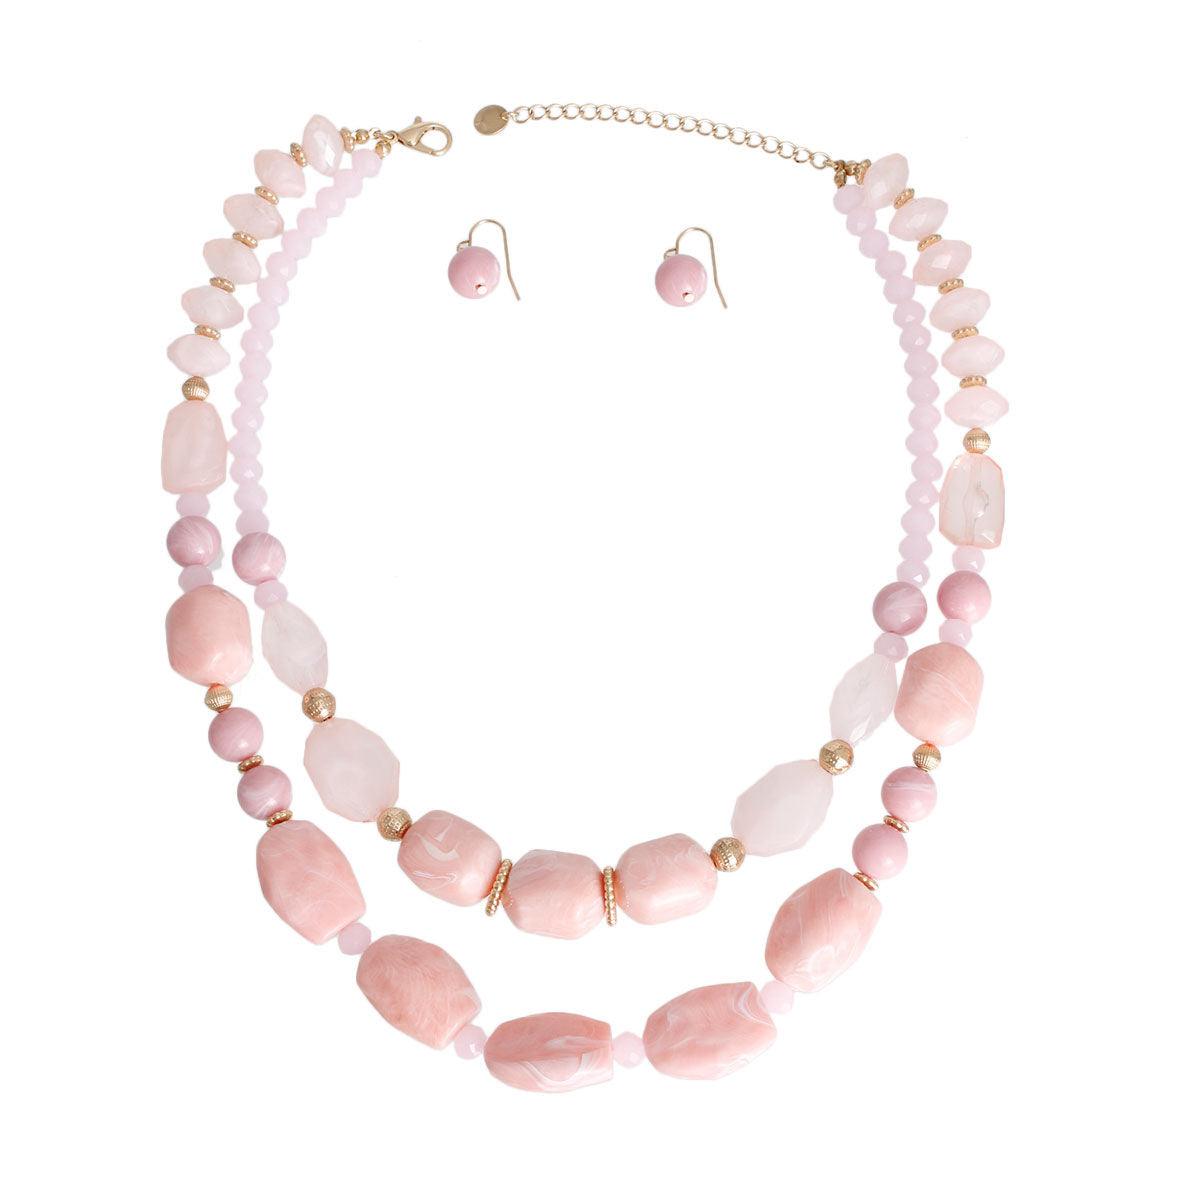 Light Pink Bead Necklace & Earrings – Timeless Set for a Classy Look